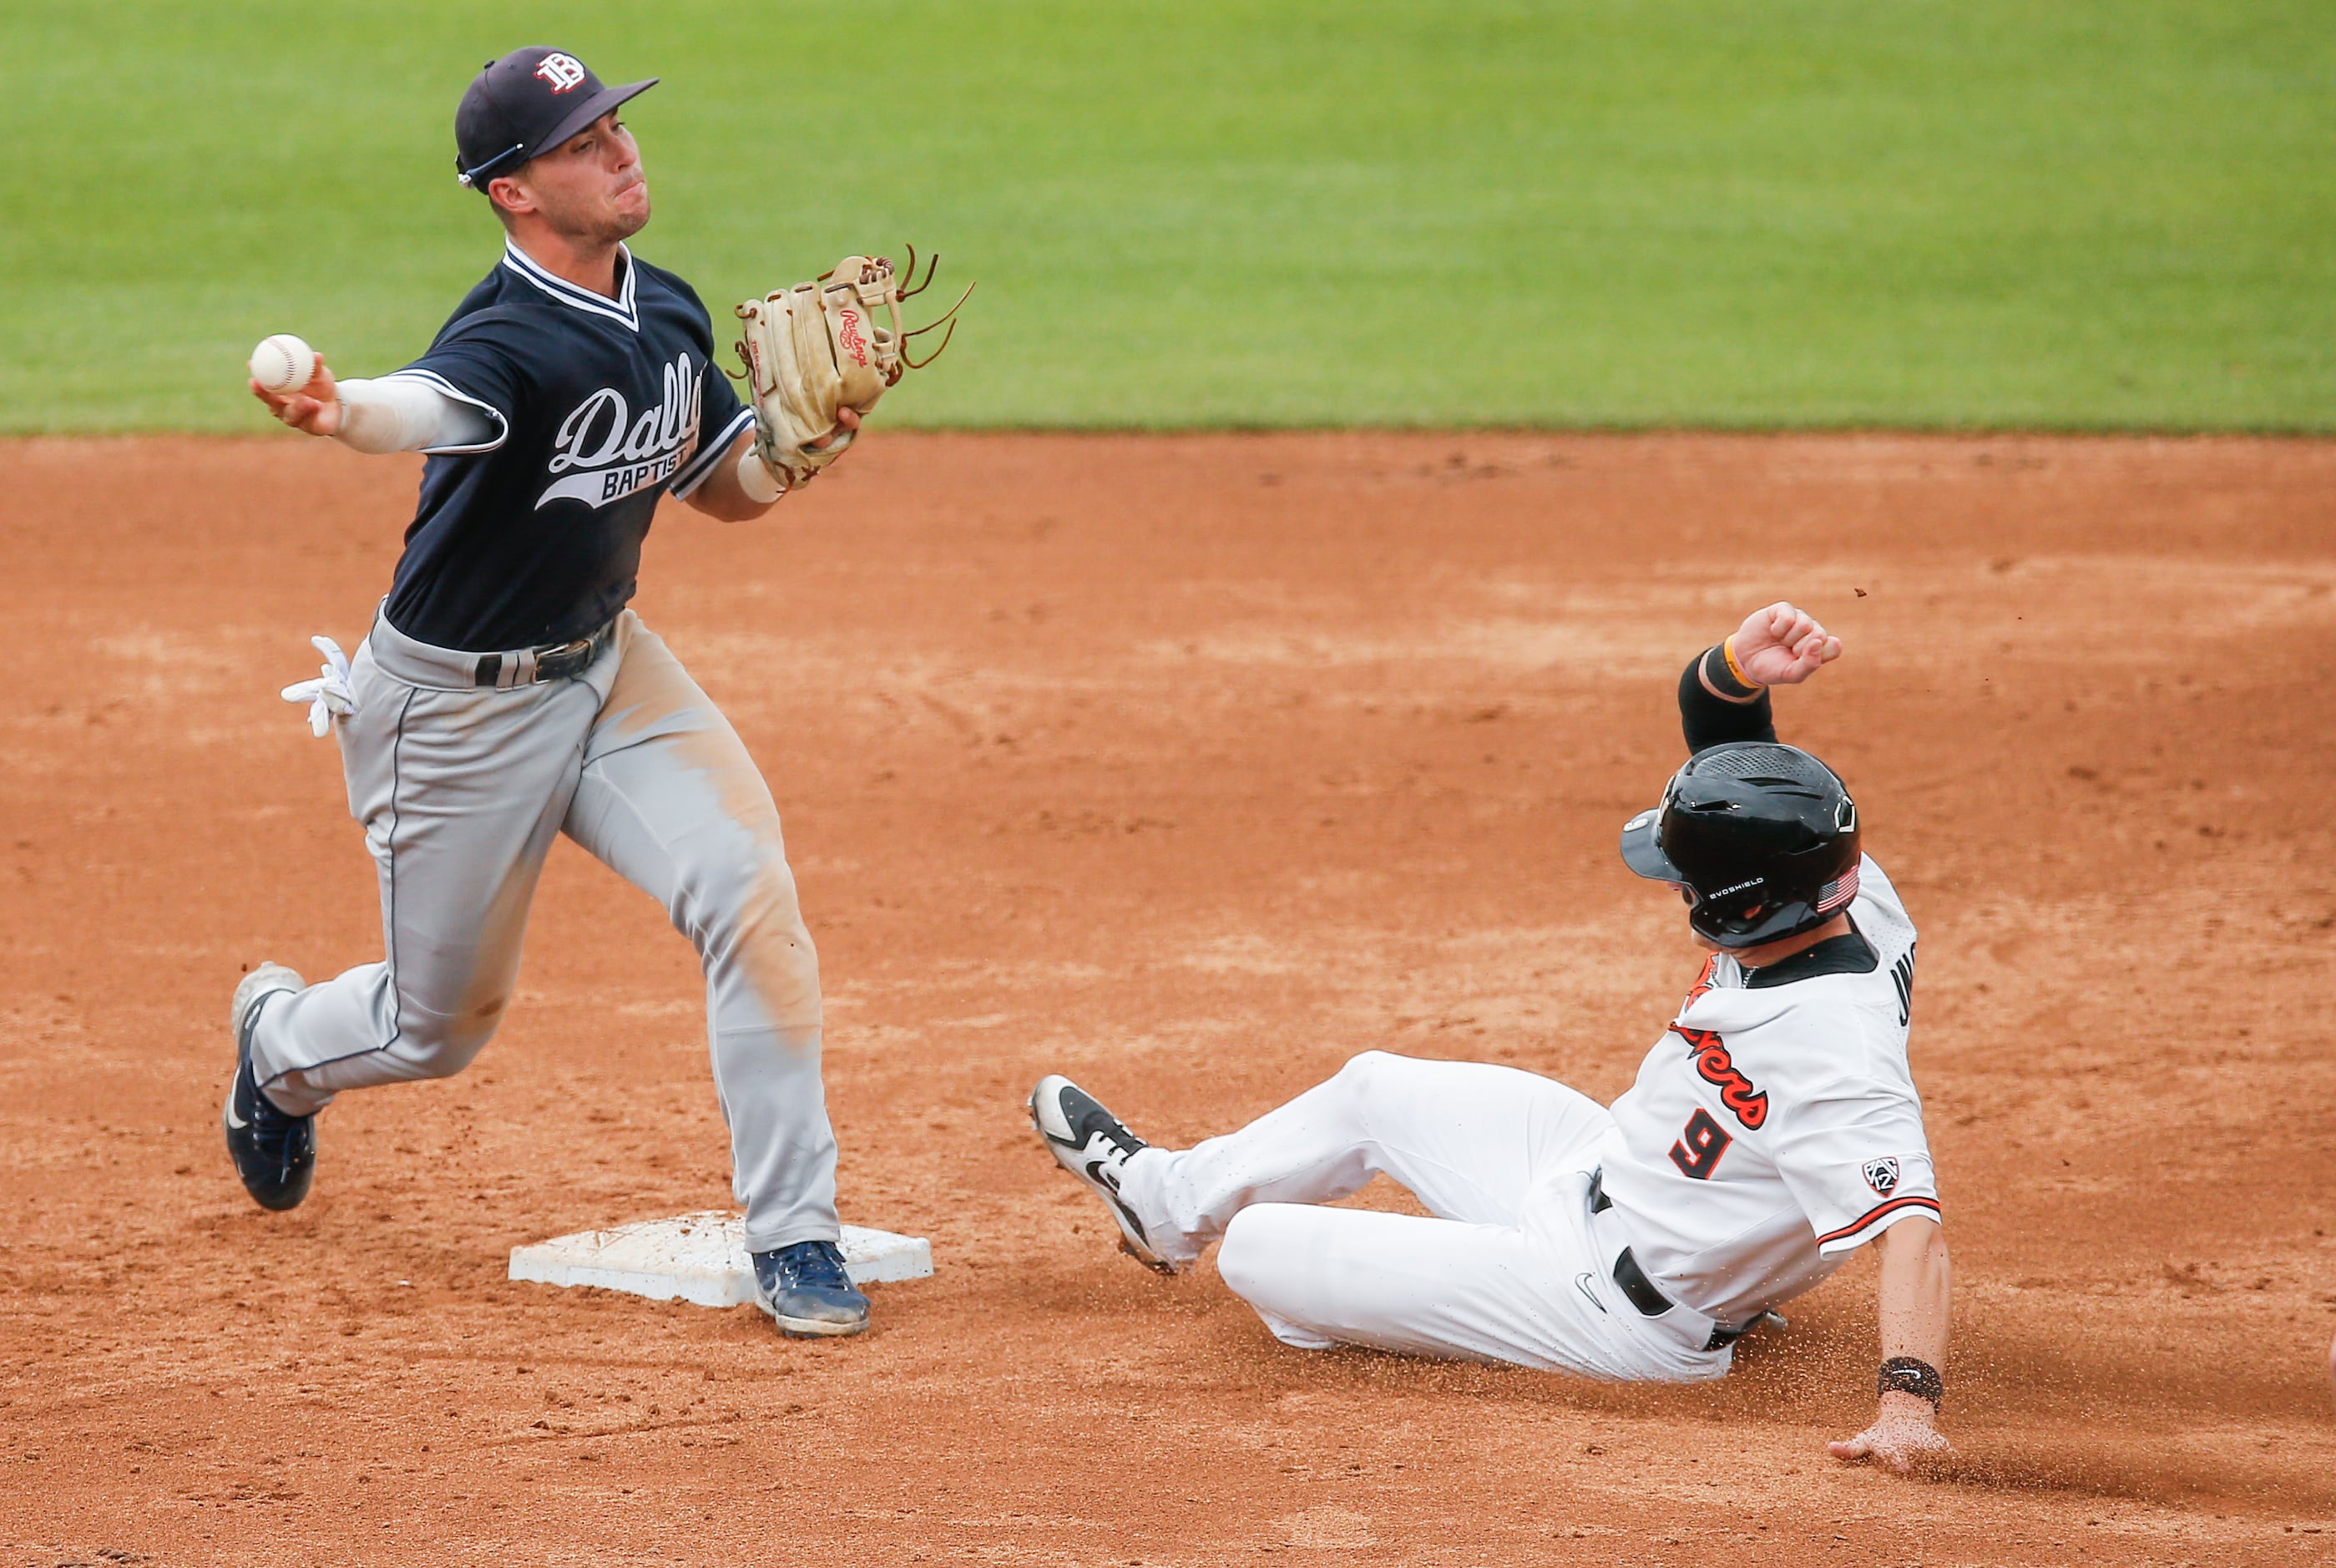 DBU infielder Jackson Glenn (3) throws to first for a double play after forcing out Oregon...